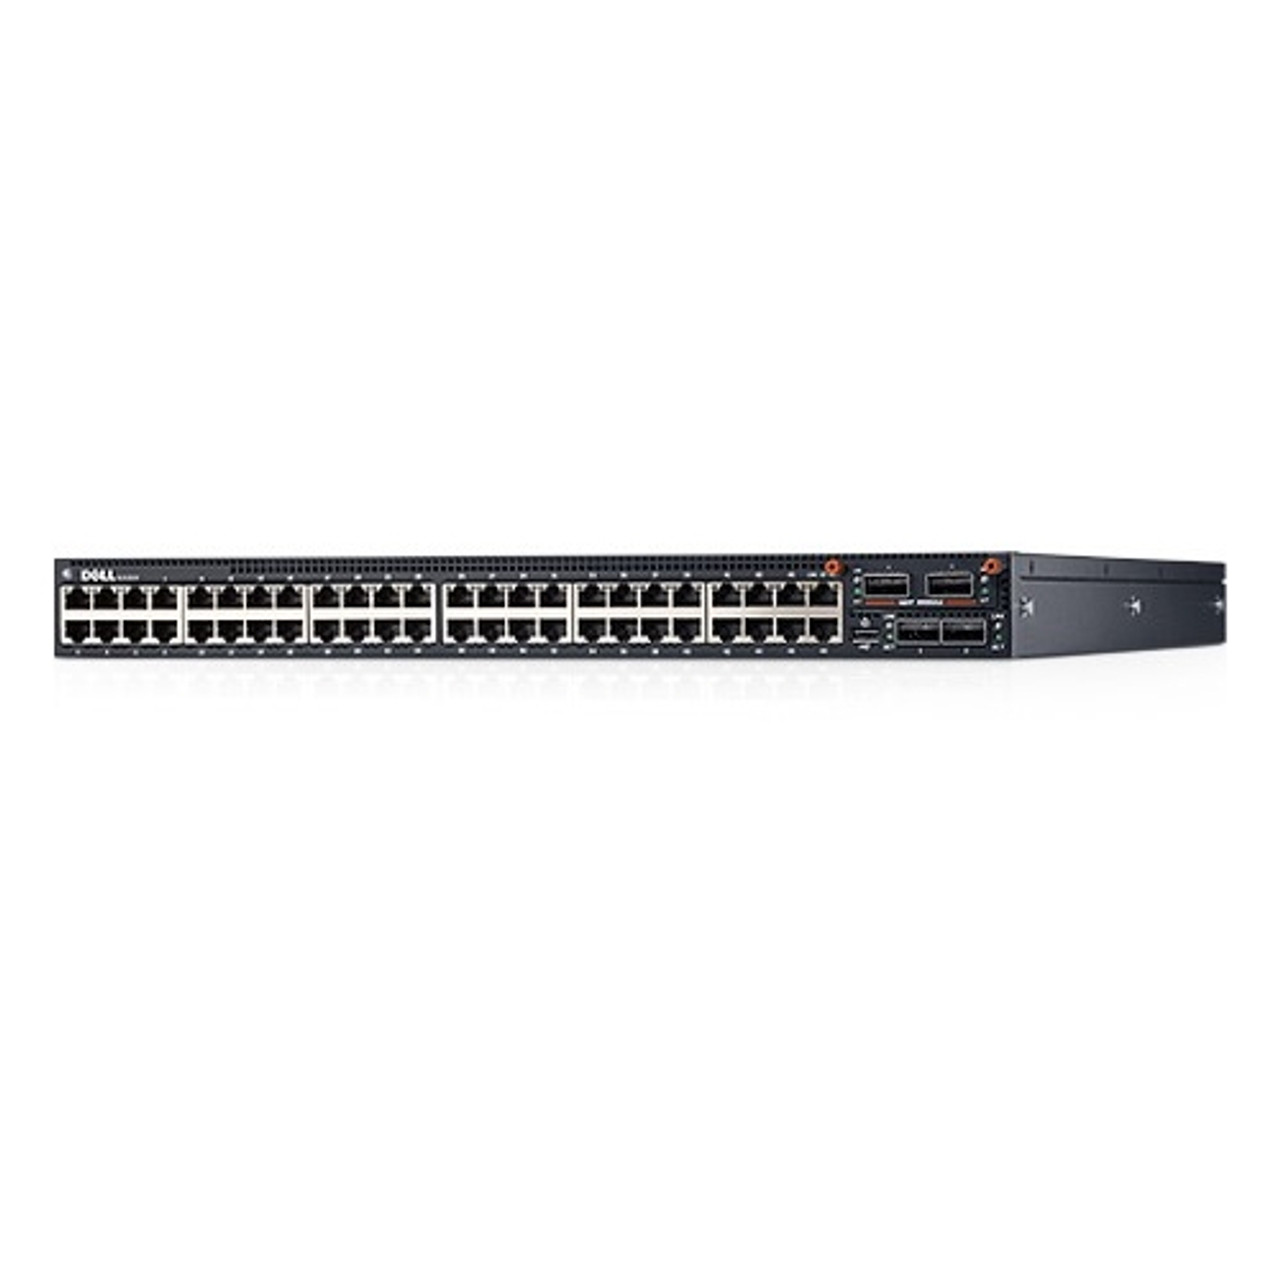 463-7700 Dell N4064f 48-Ports 10Gbps SFP+ Managed Switch with 2x 40Gbps QSFP+ Ports (Refurbished)